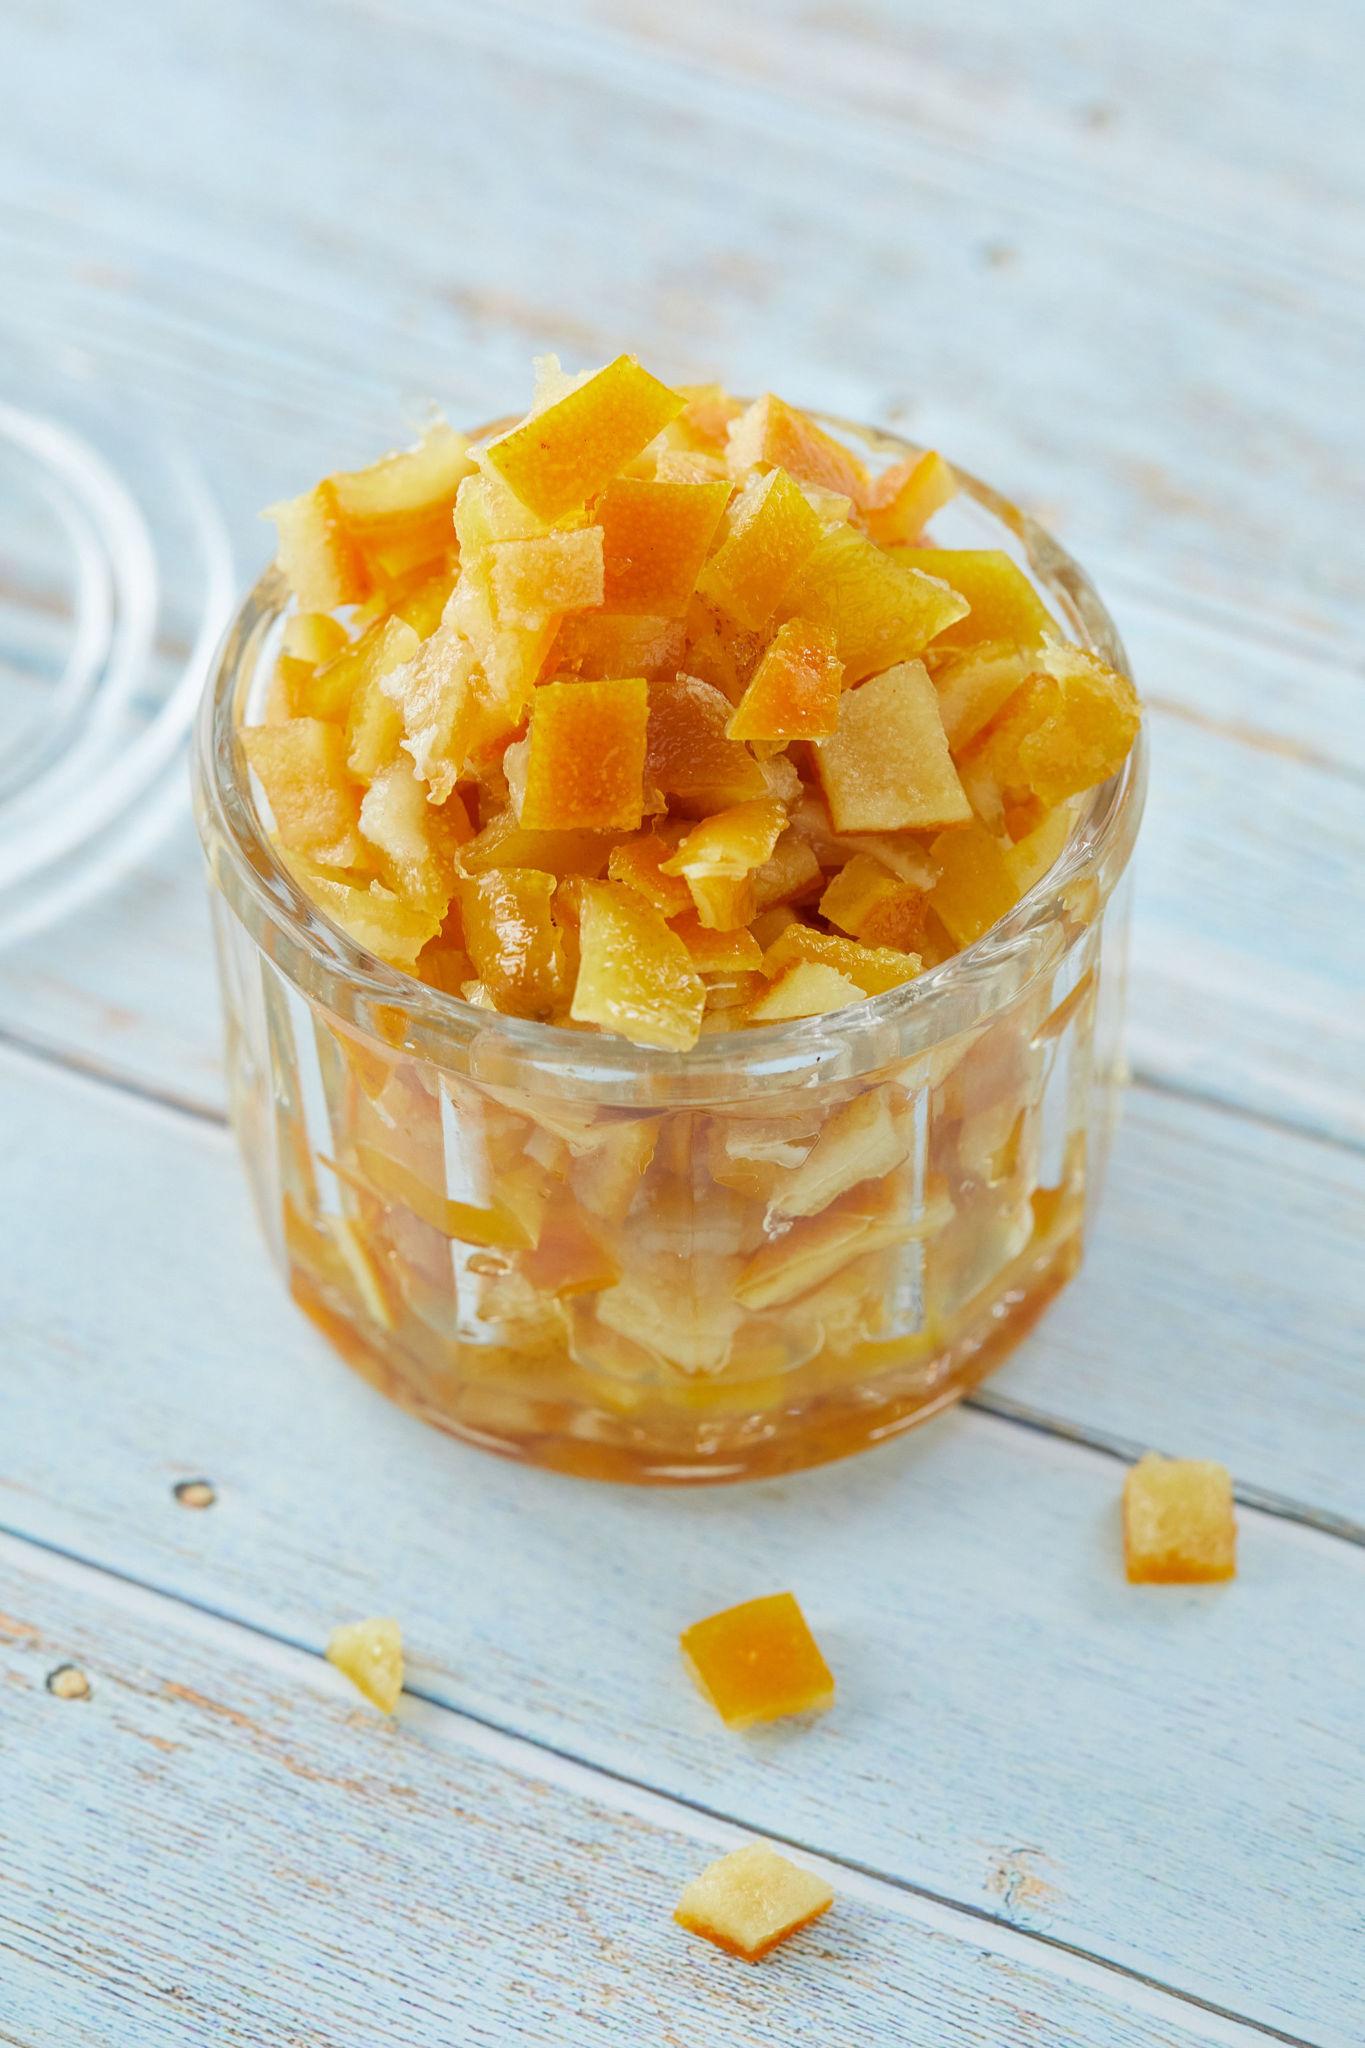 A finished jar of my candied mixed peel recipe on a wood table.